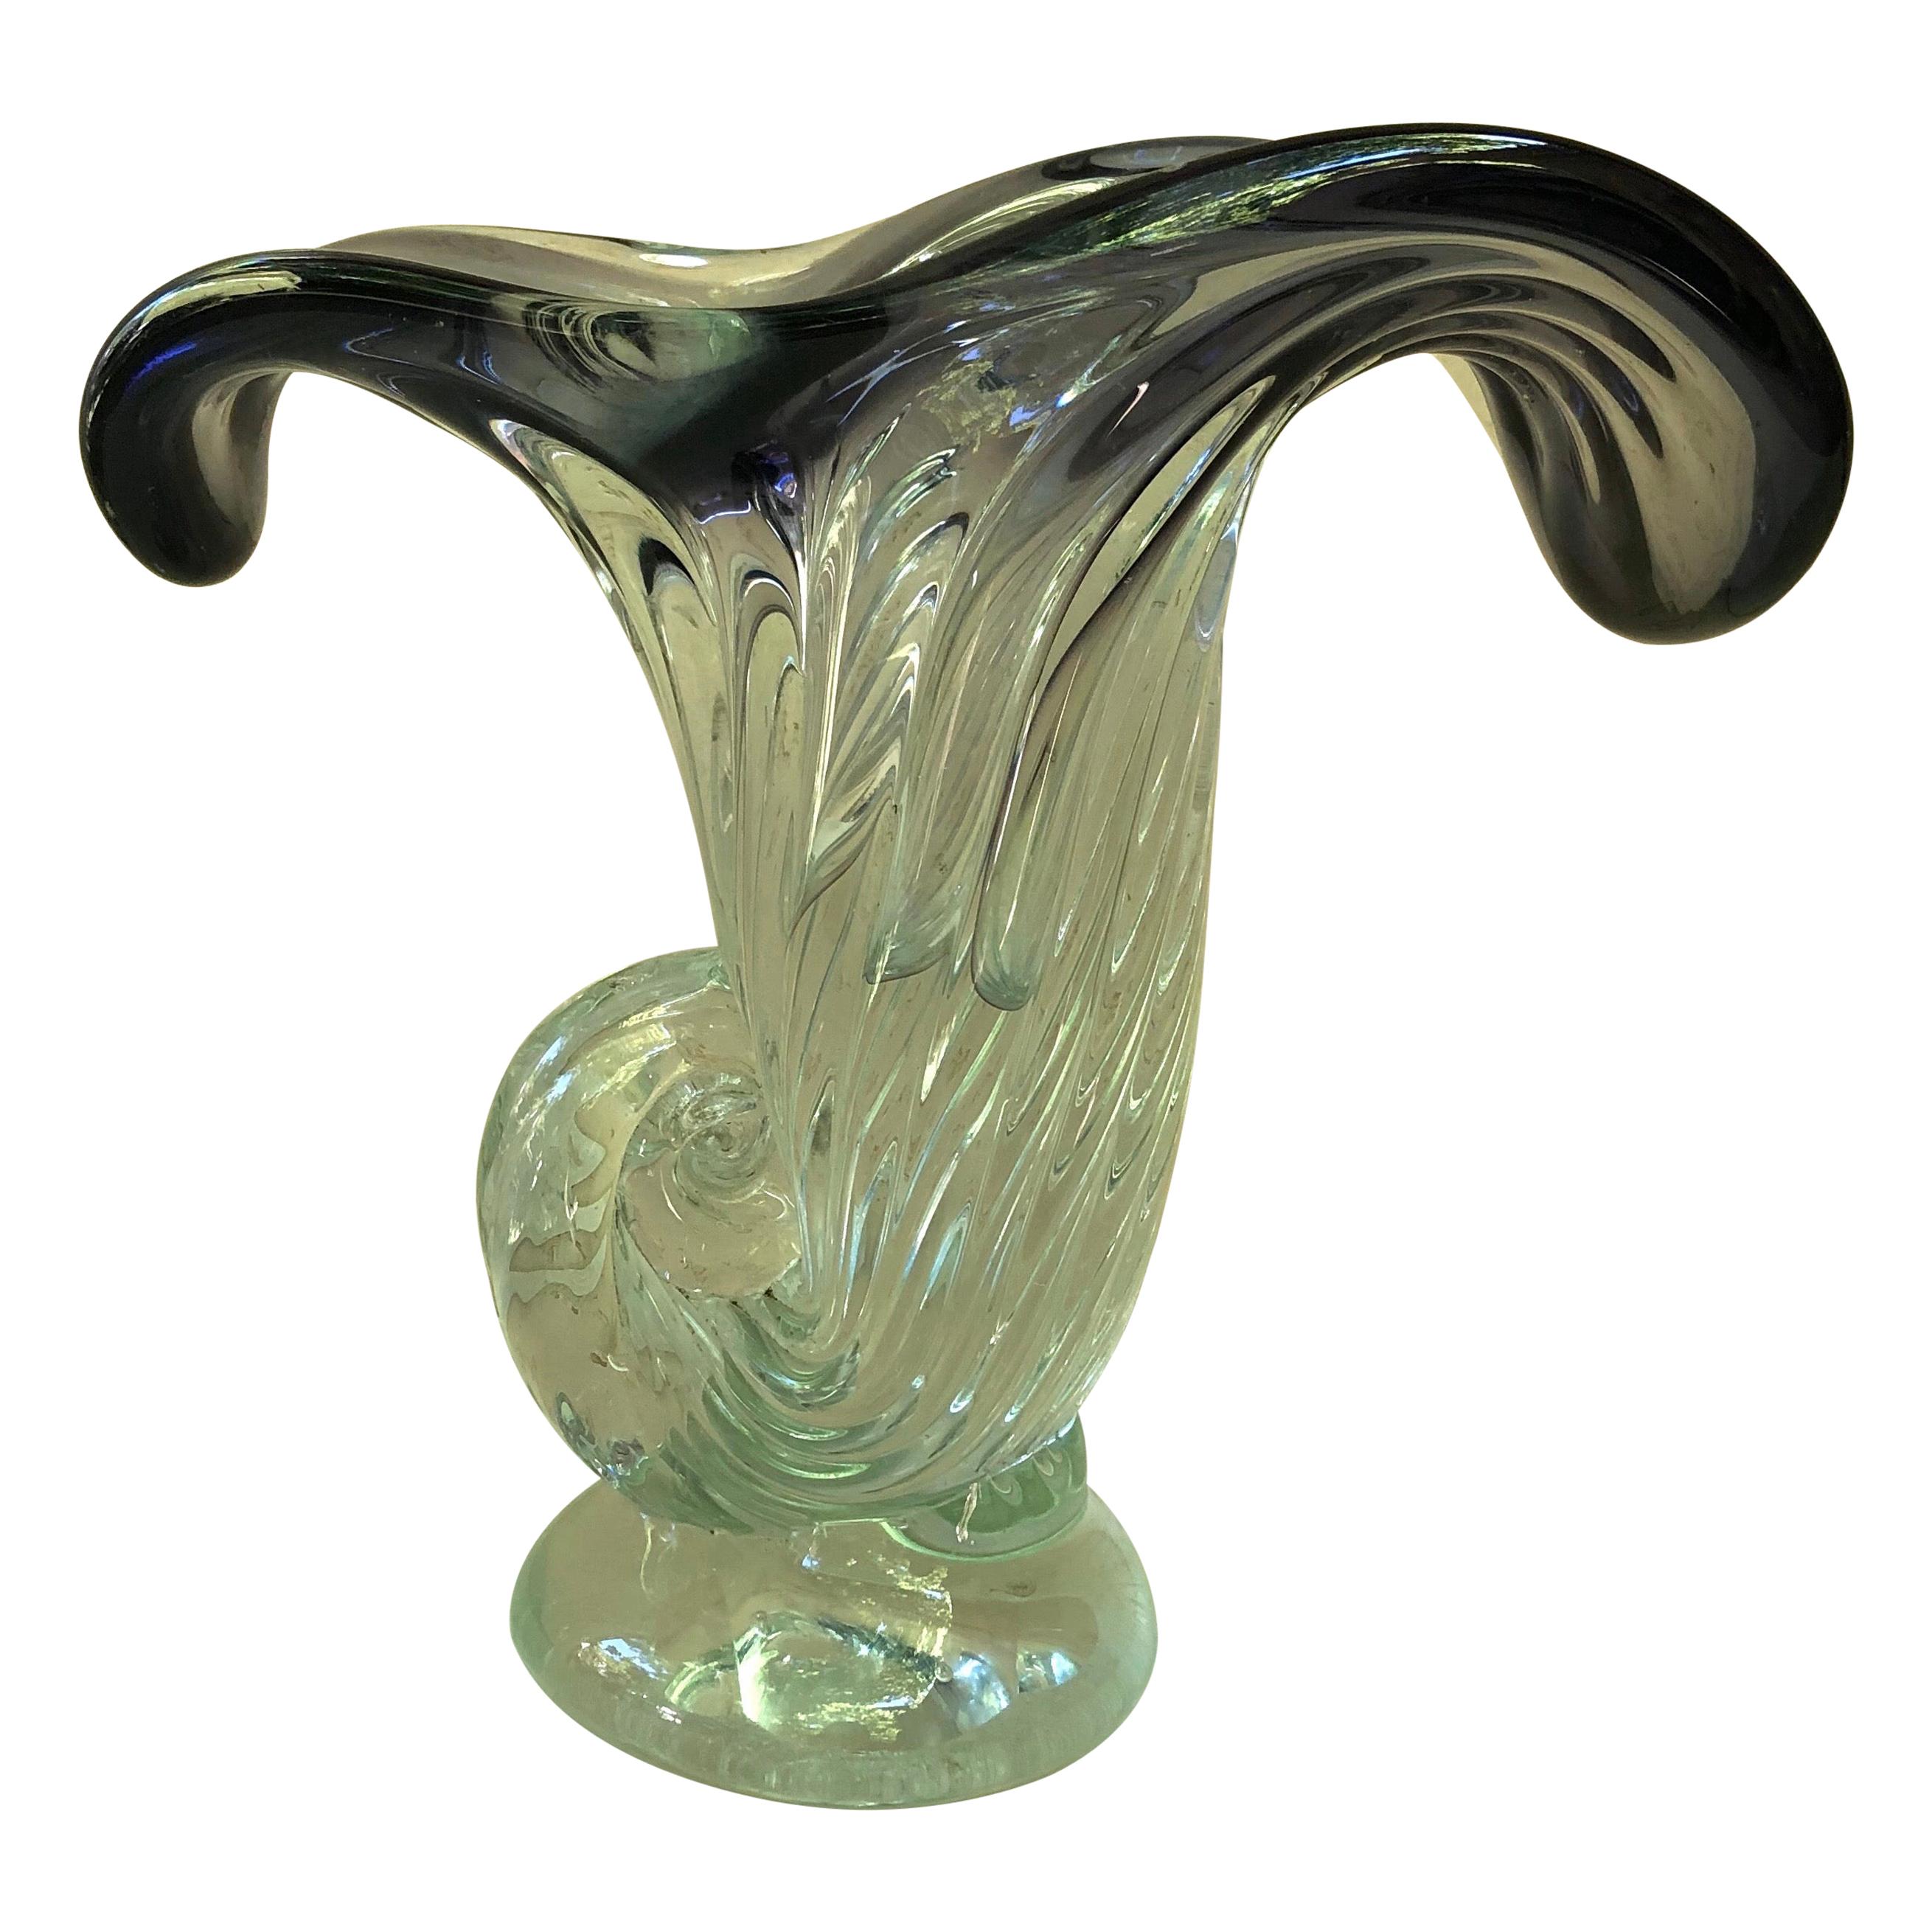 Can Murano glass be clear?